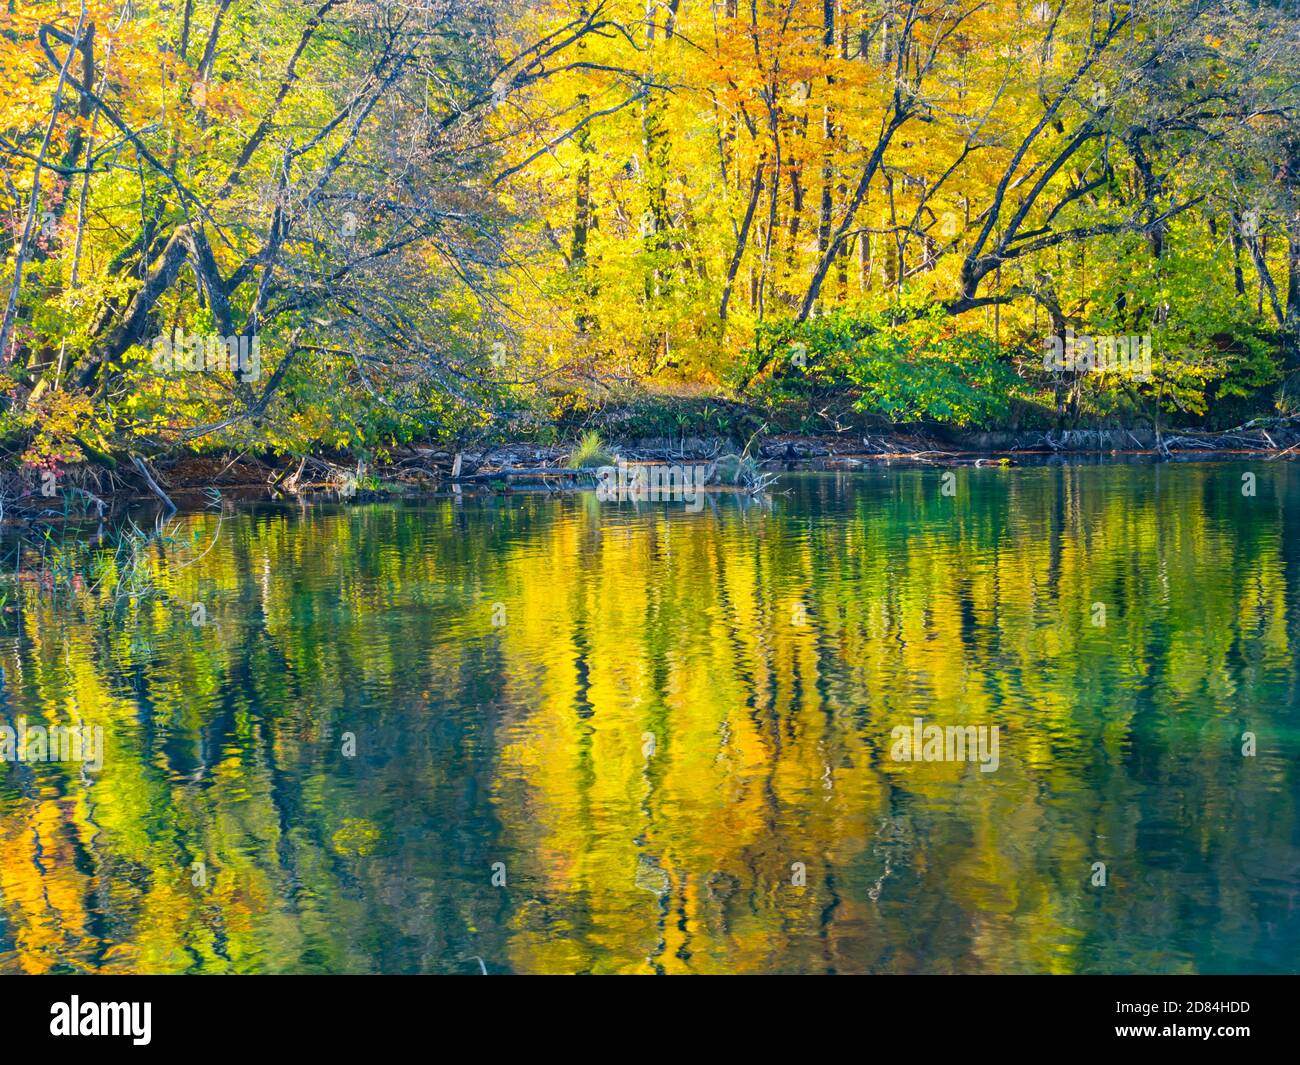 Lake coast reflection Autumnal scenery in Plitvice lakes national park situated in Croatia Europe Stock Photo